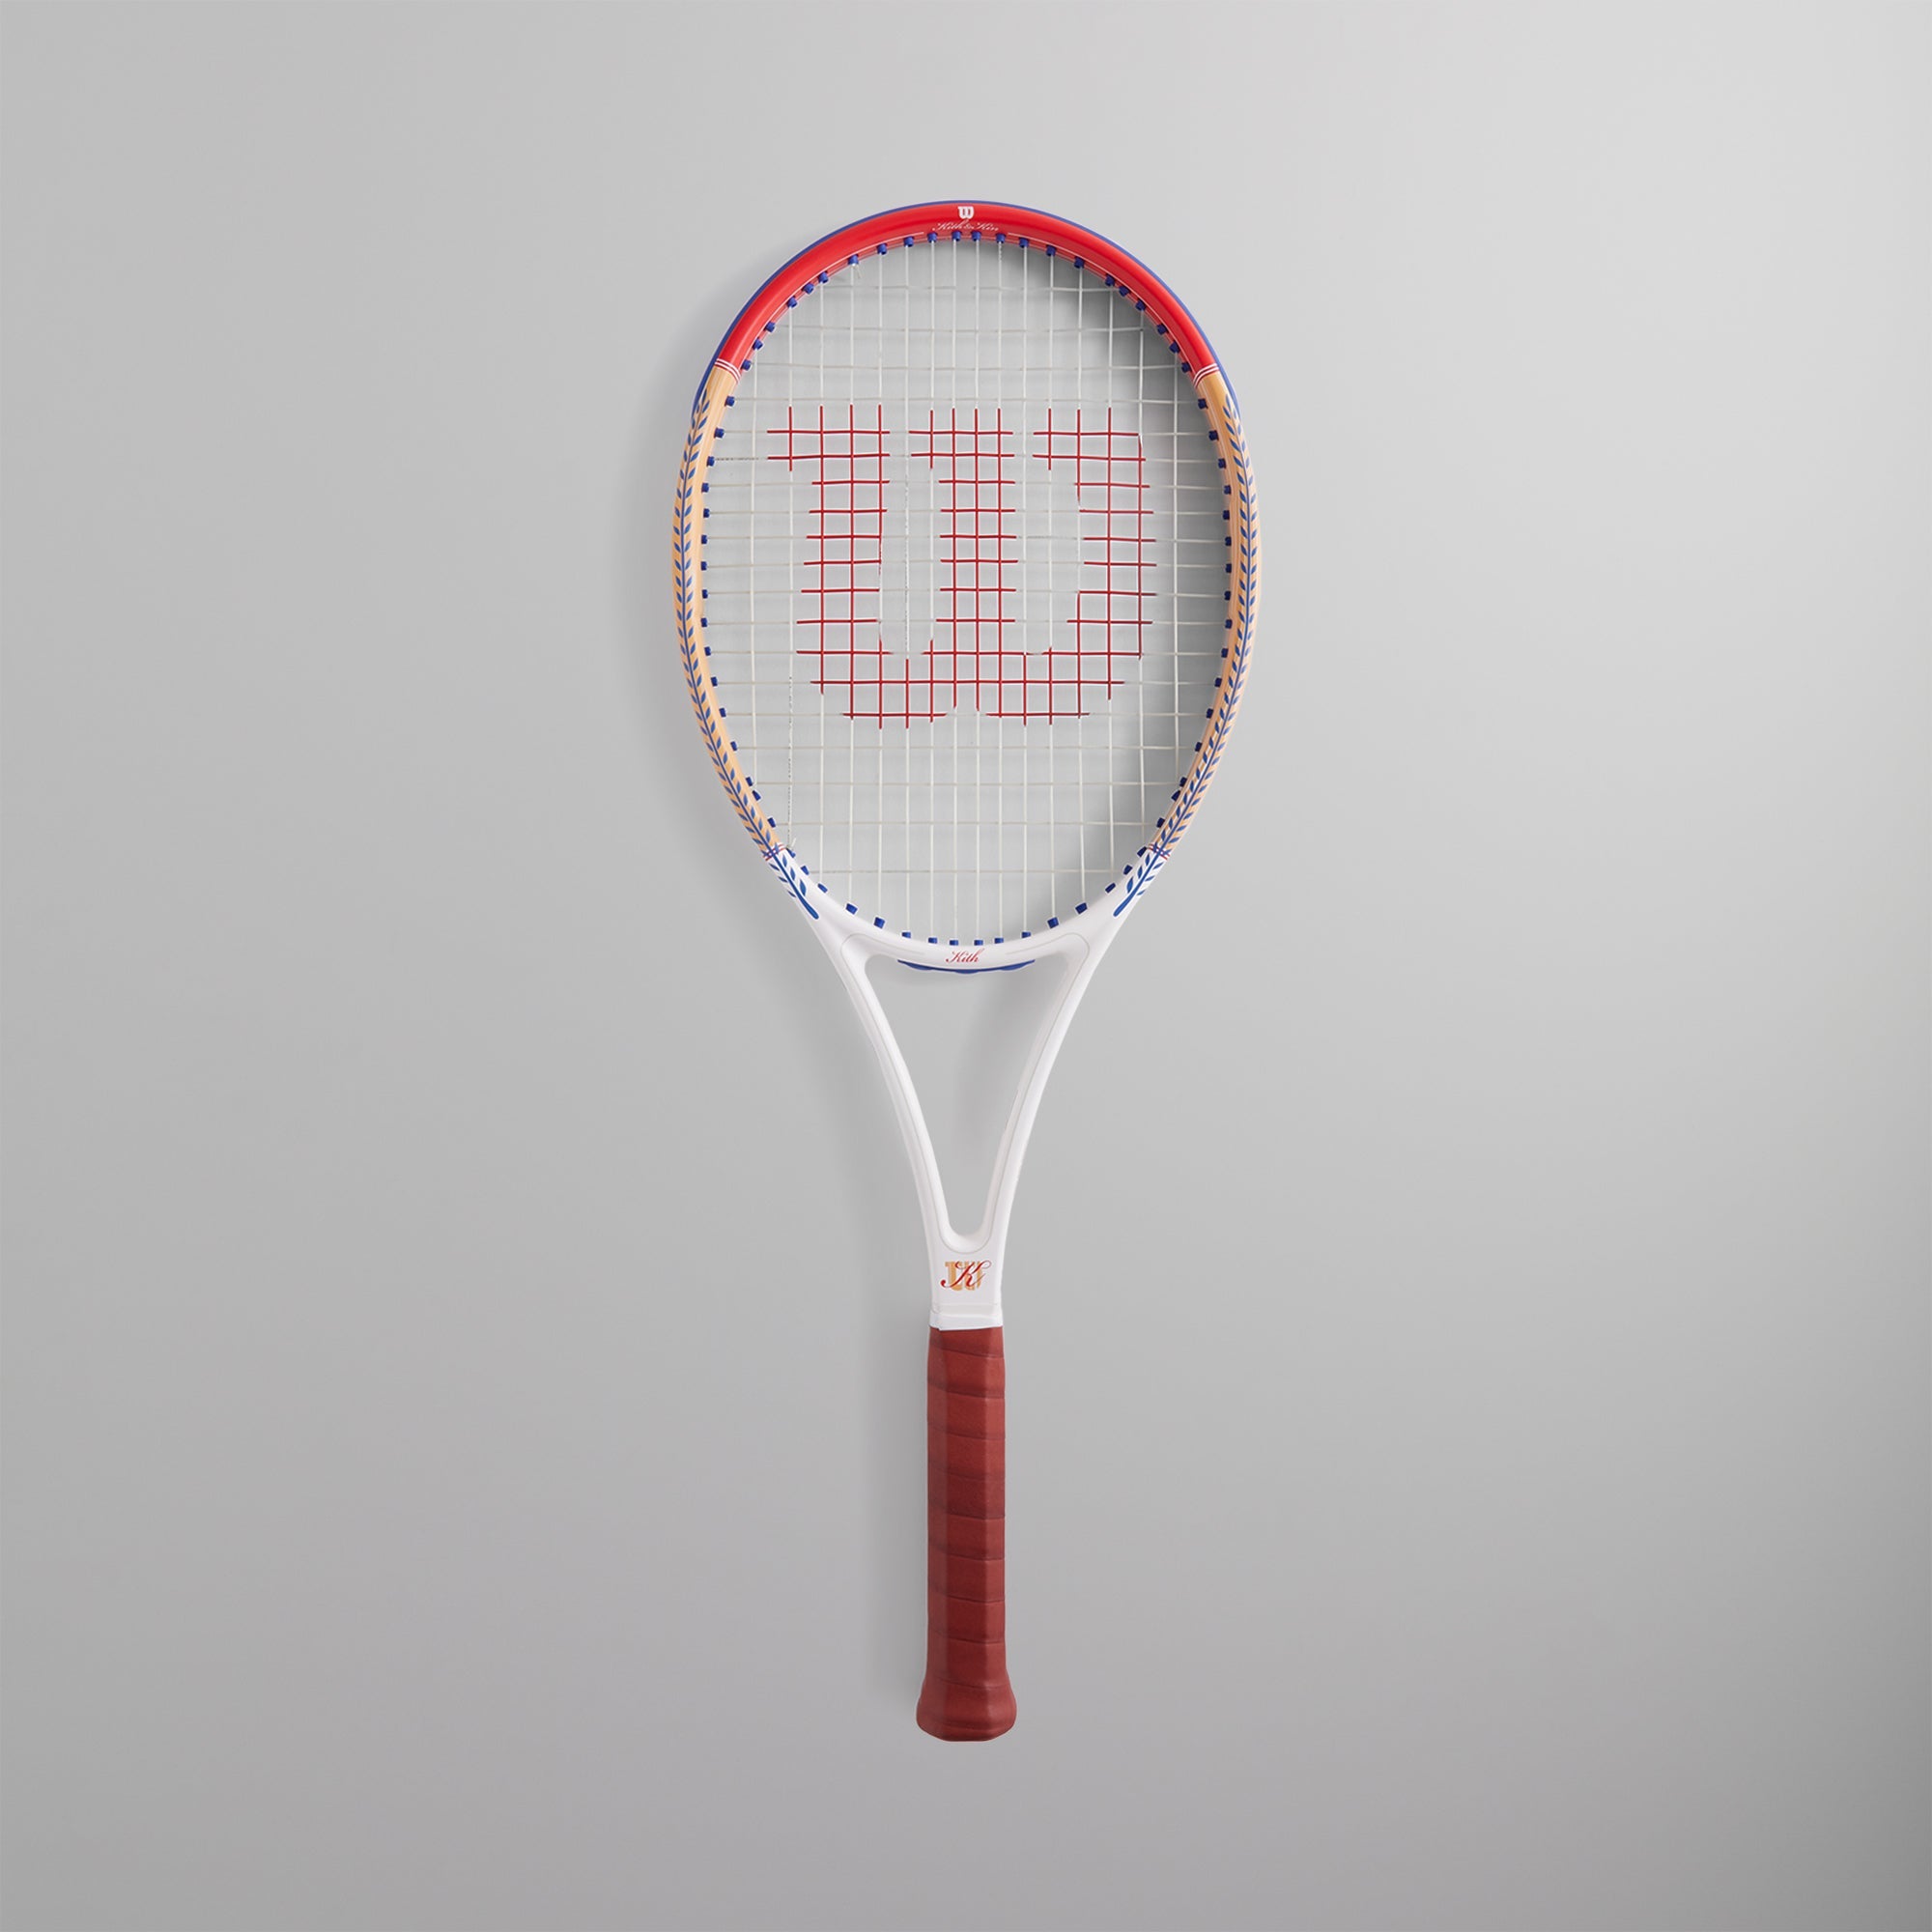 Kith for Wilson Tennis Racket PS97L 